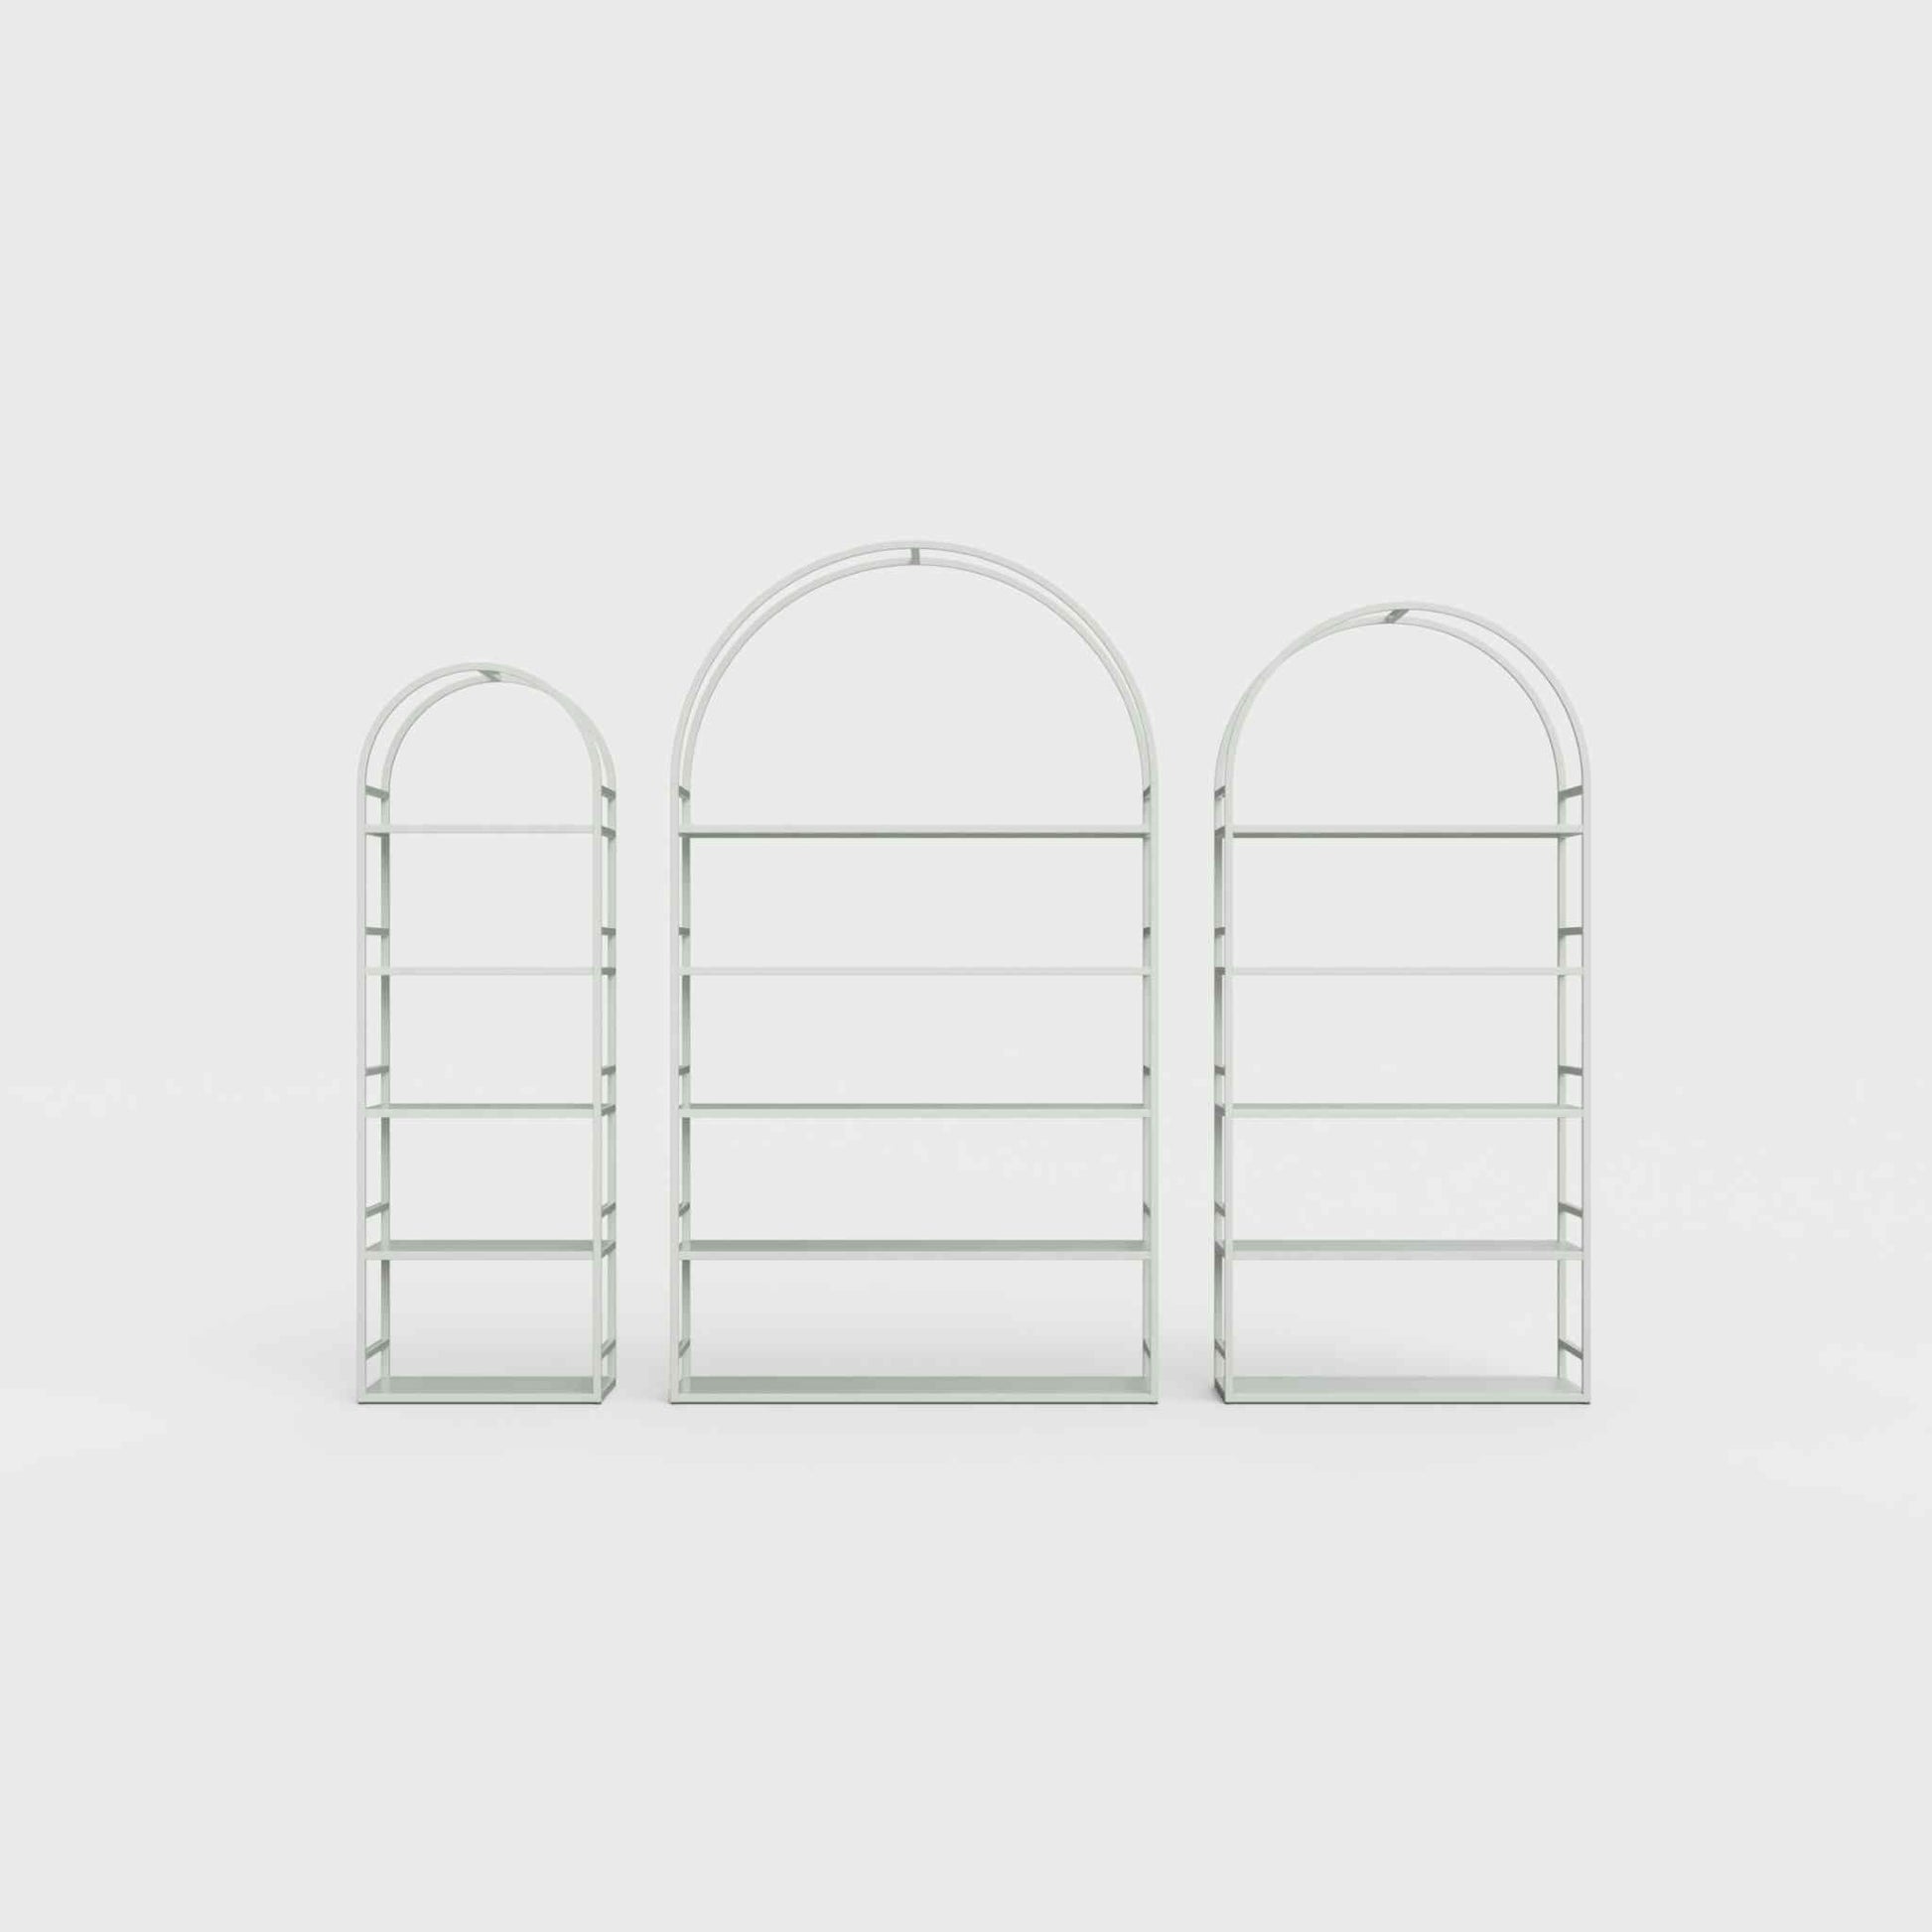 Arched bookcase Arkada, available in Switzerland through ÉTAUDORÉ, made from highest quality powdered coated steel in light matcha green color